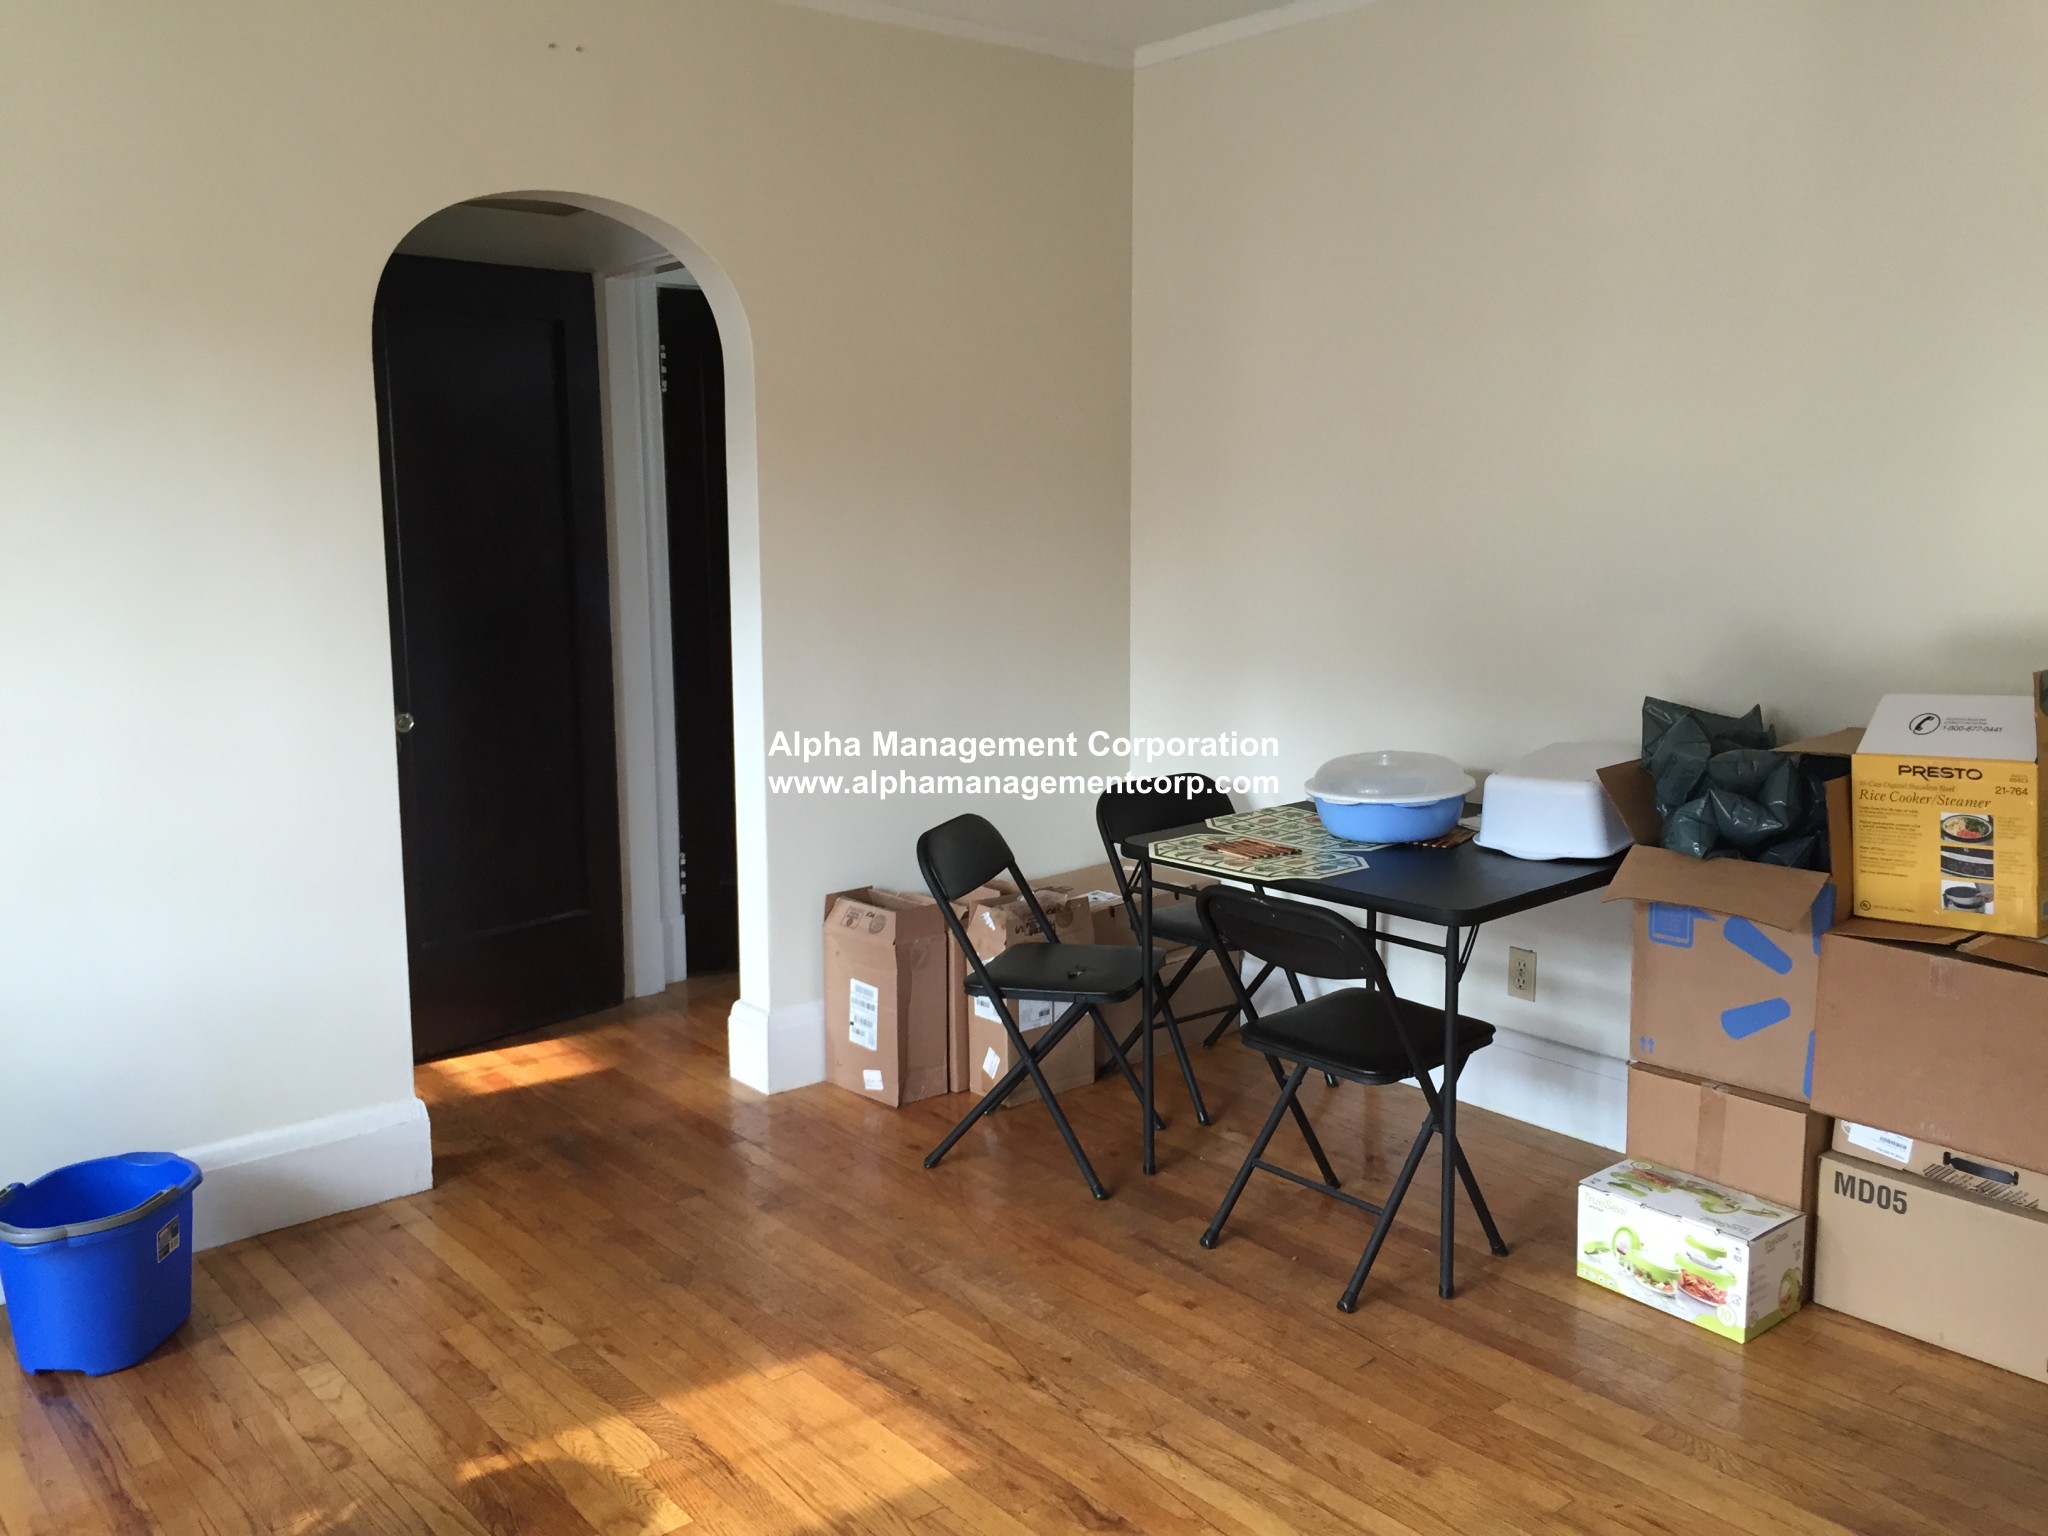 Photos of apartment on Eastern Ave.,Malden MA 02148